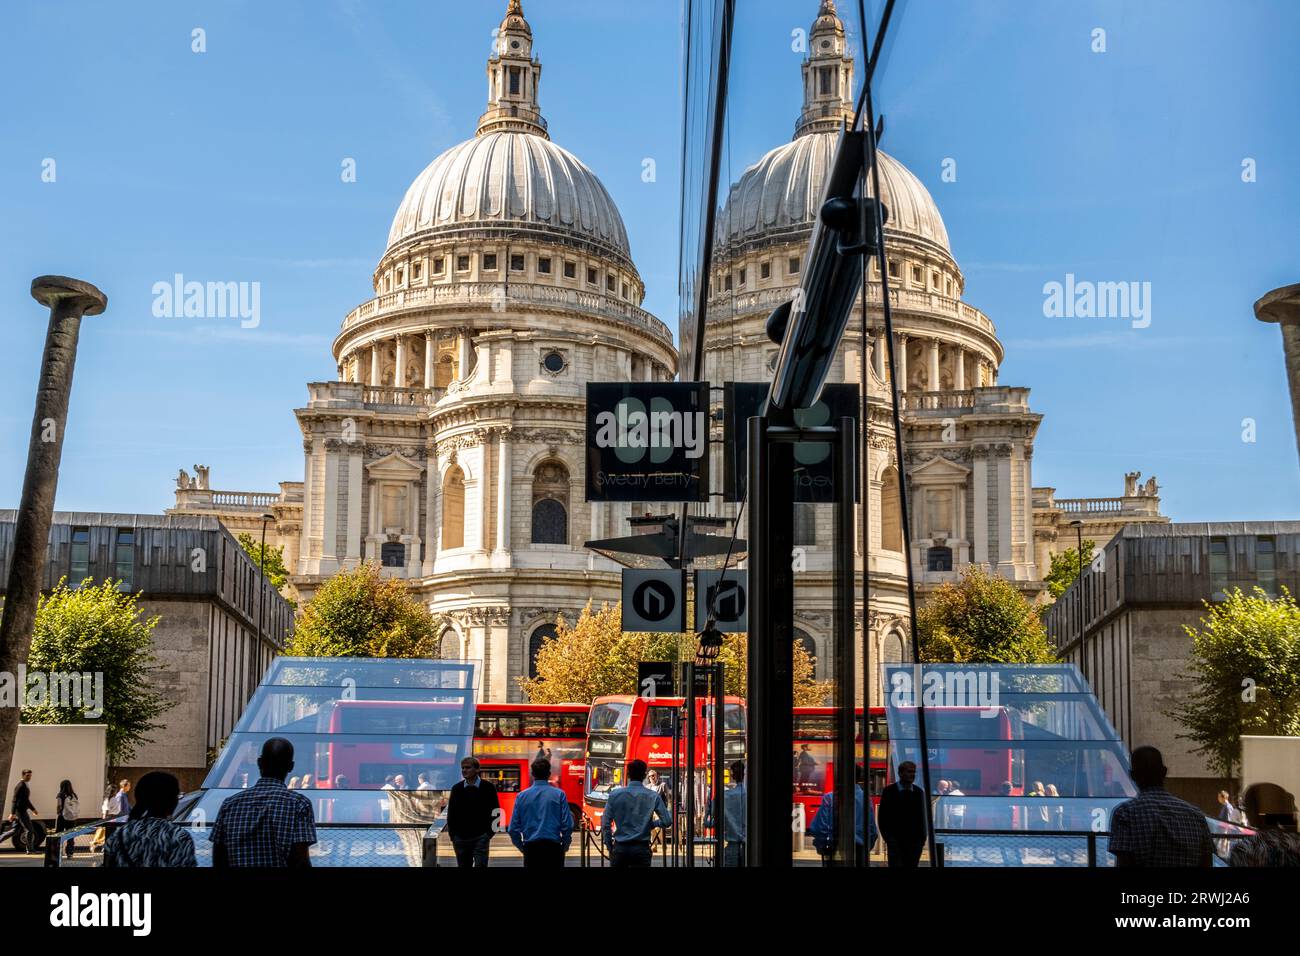 St Paul's Cathedral Reflected In The Windows Of The One New Change Shopping Centre, The City of London, London, UK. Stock Photo